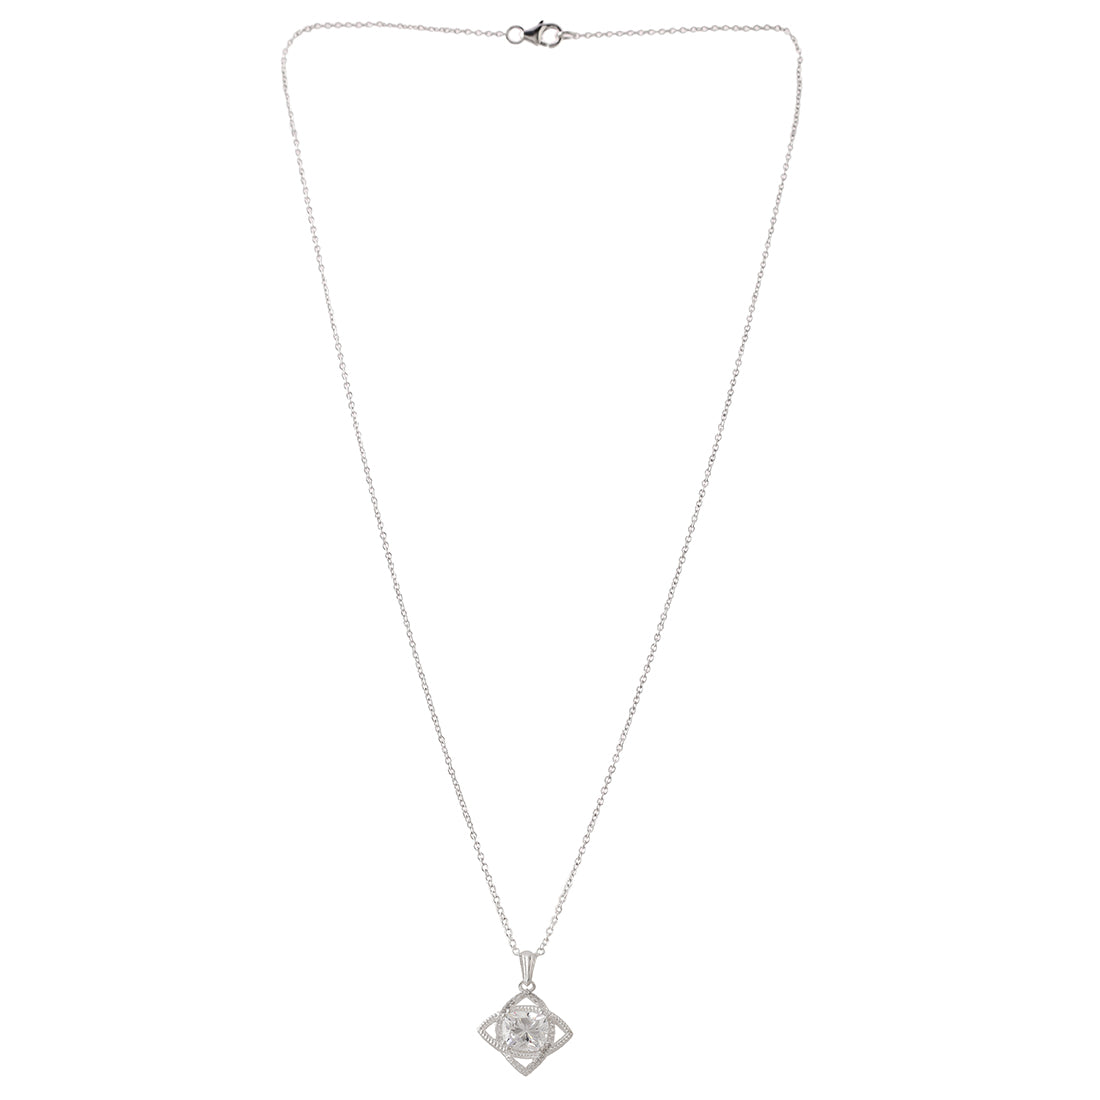 925 Sterling Silver Cubic Zirconia Pendant